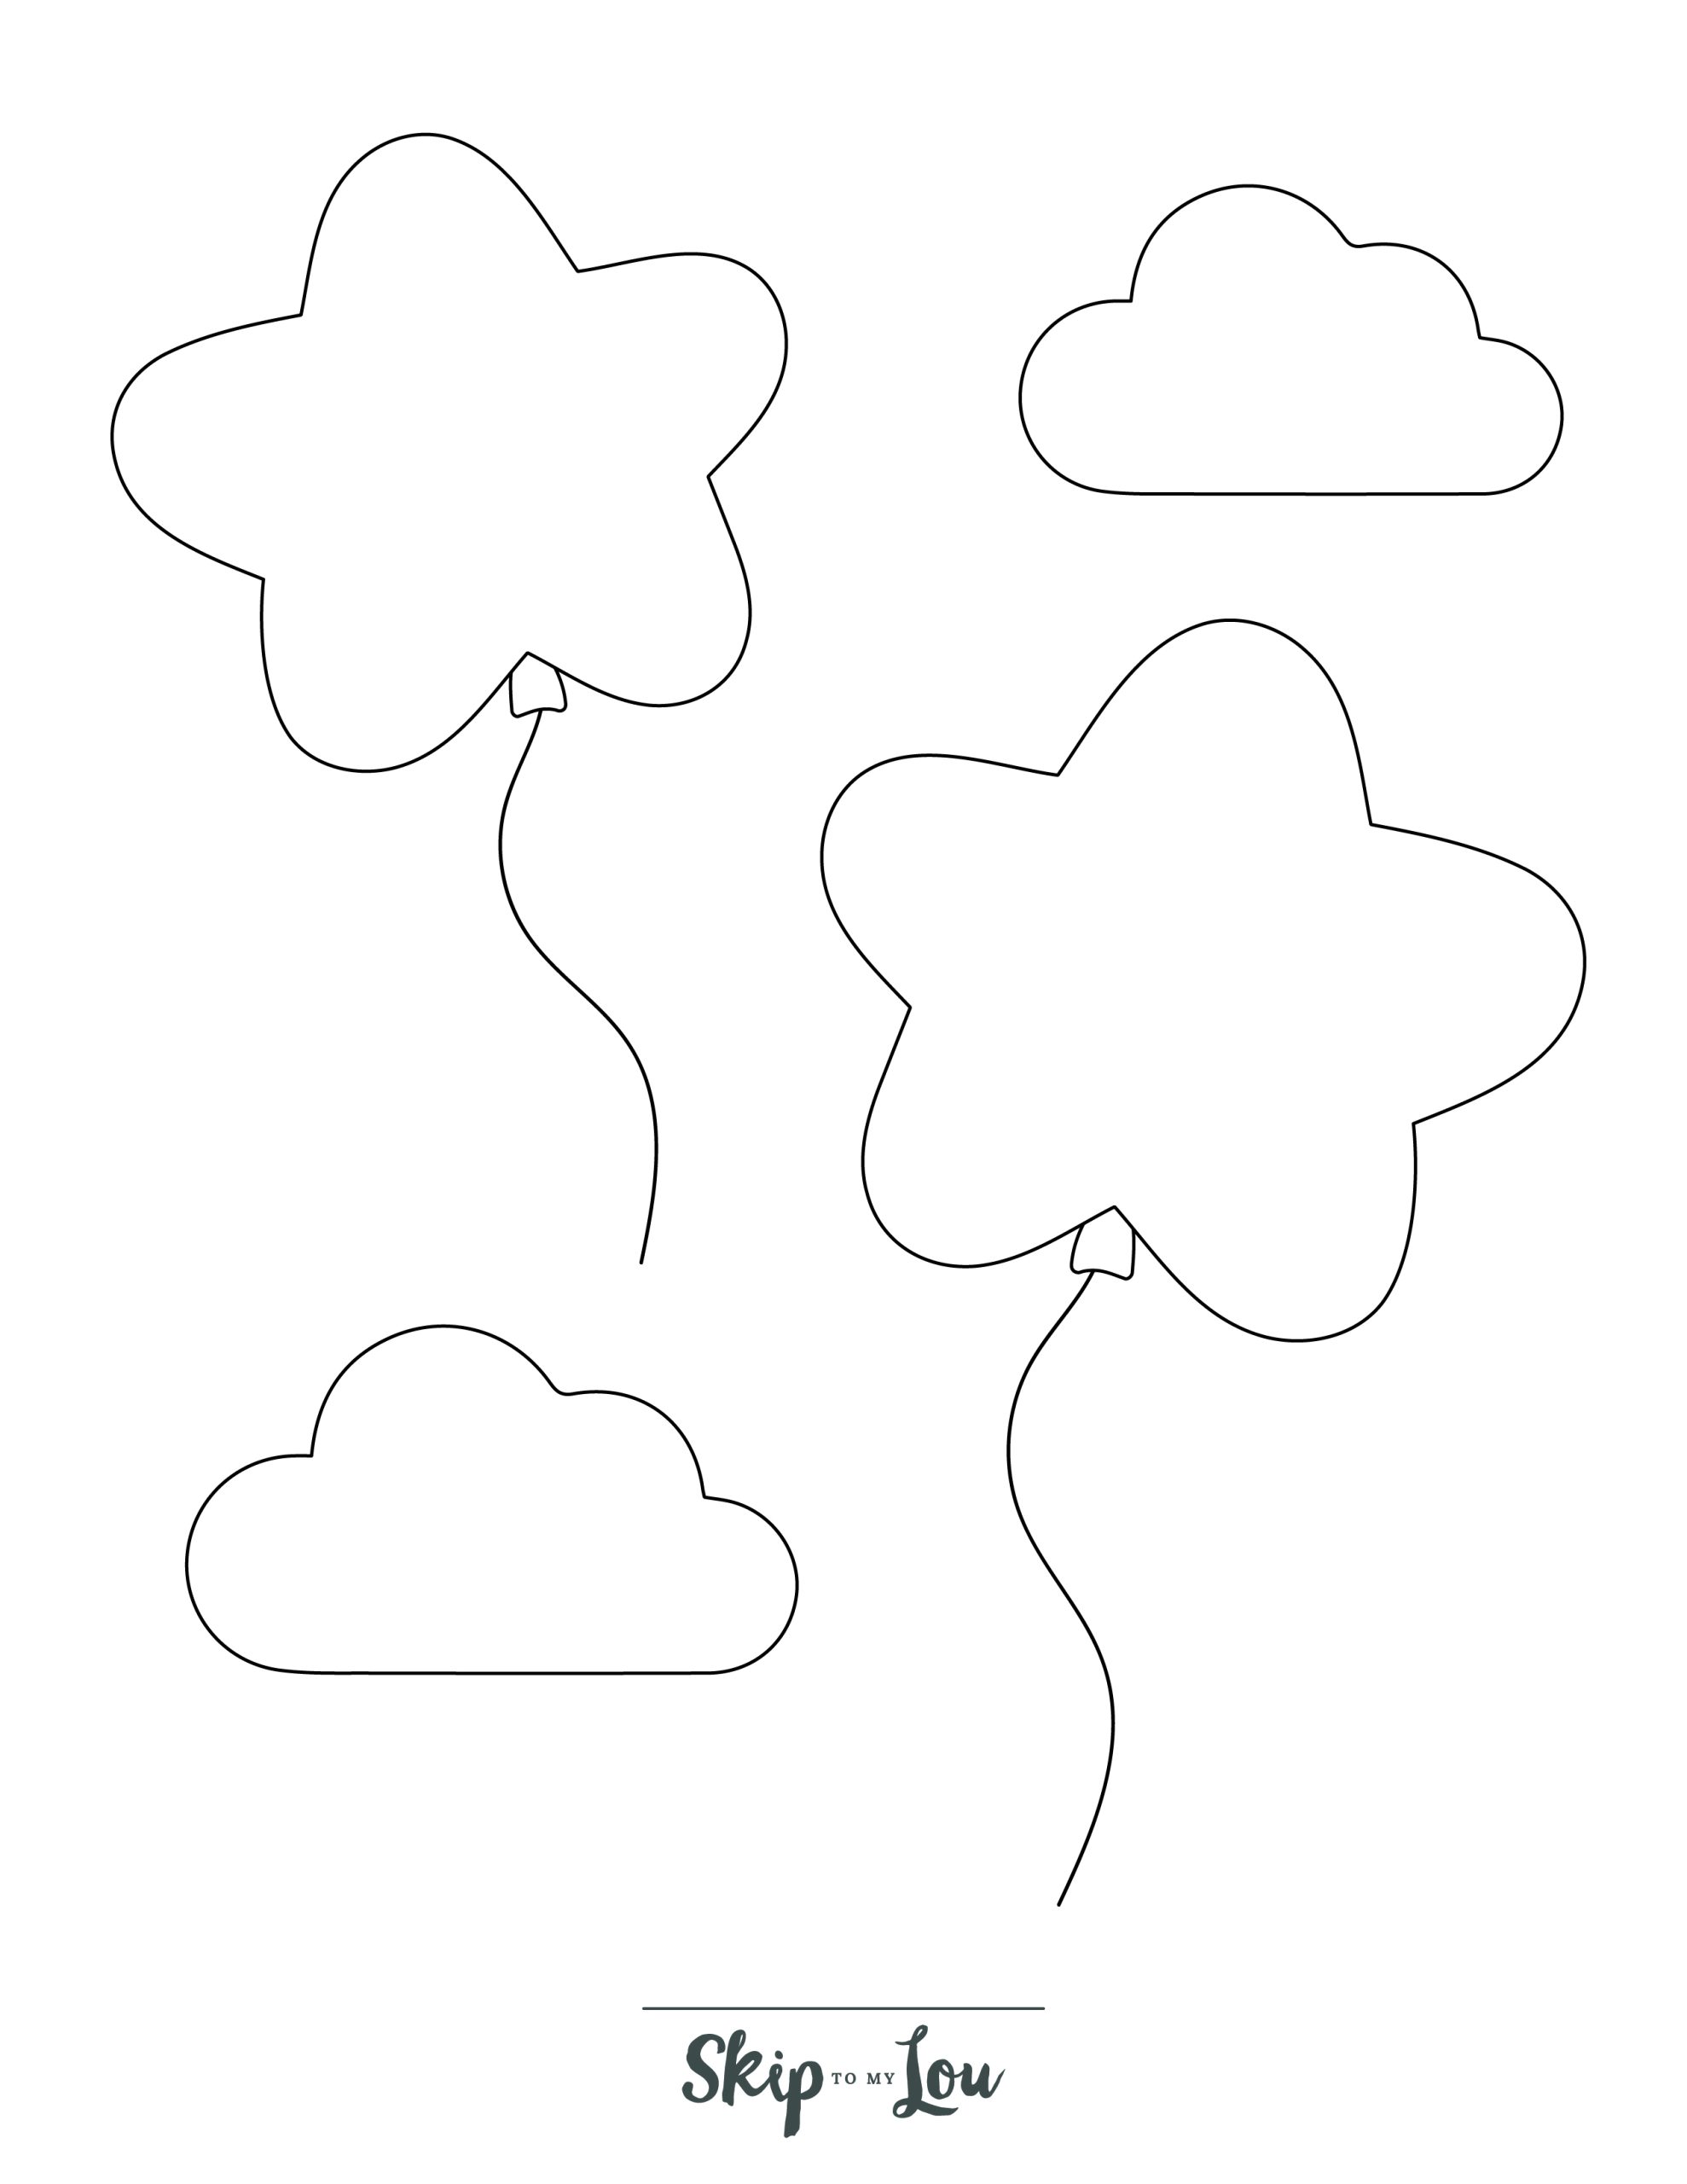 Star Coloring Page 11 - Line drawing of a stars in clouds with ballon tassles